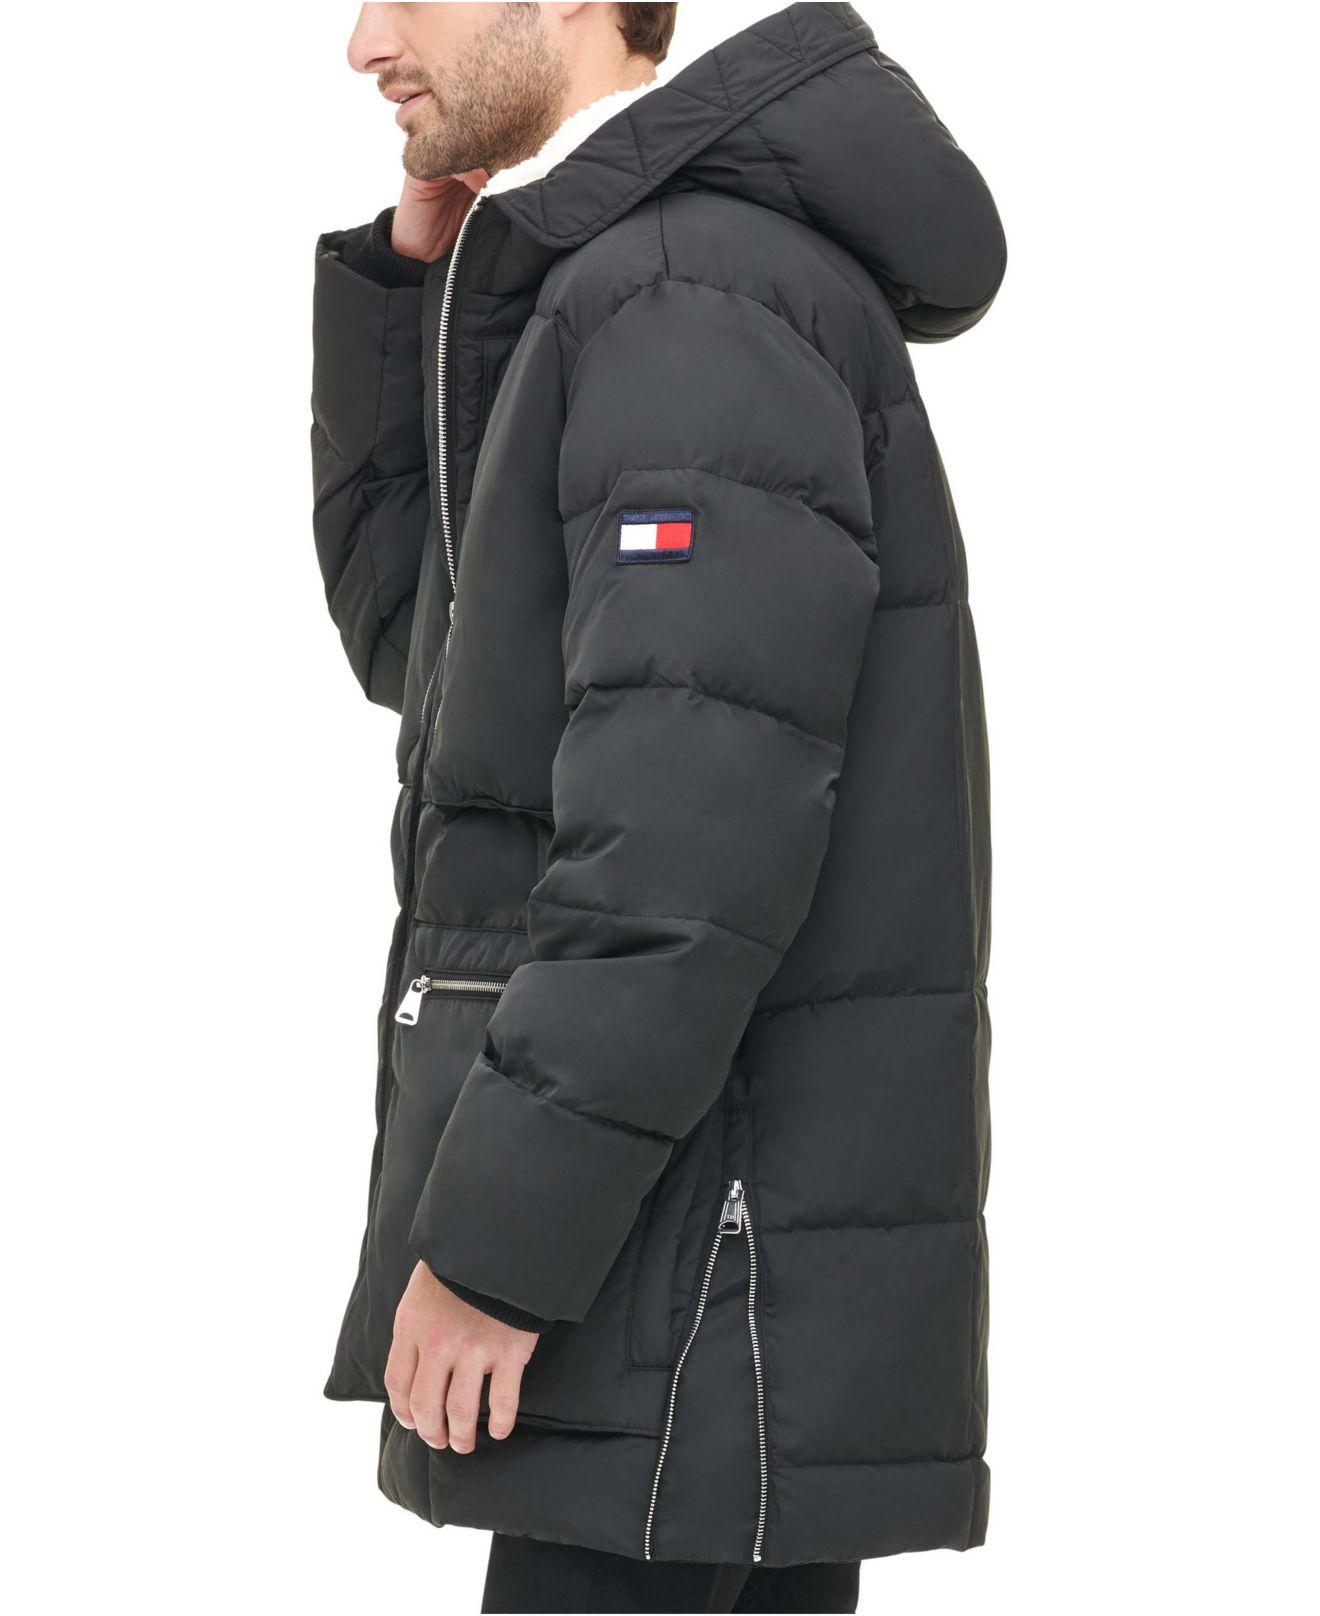 tommy jeans lined hooded parka jacket